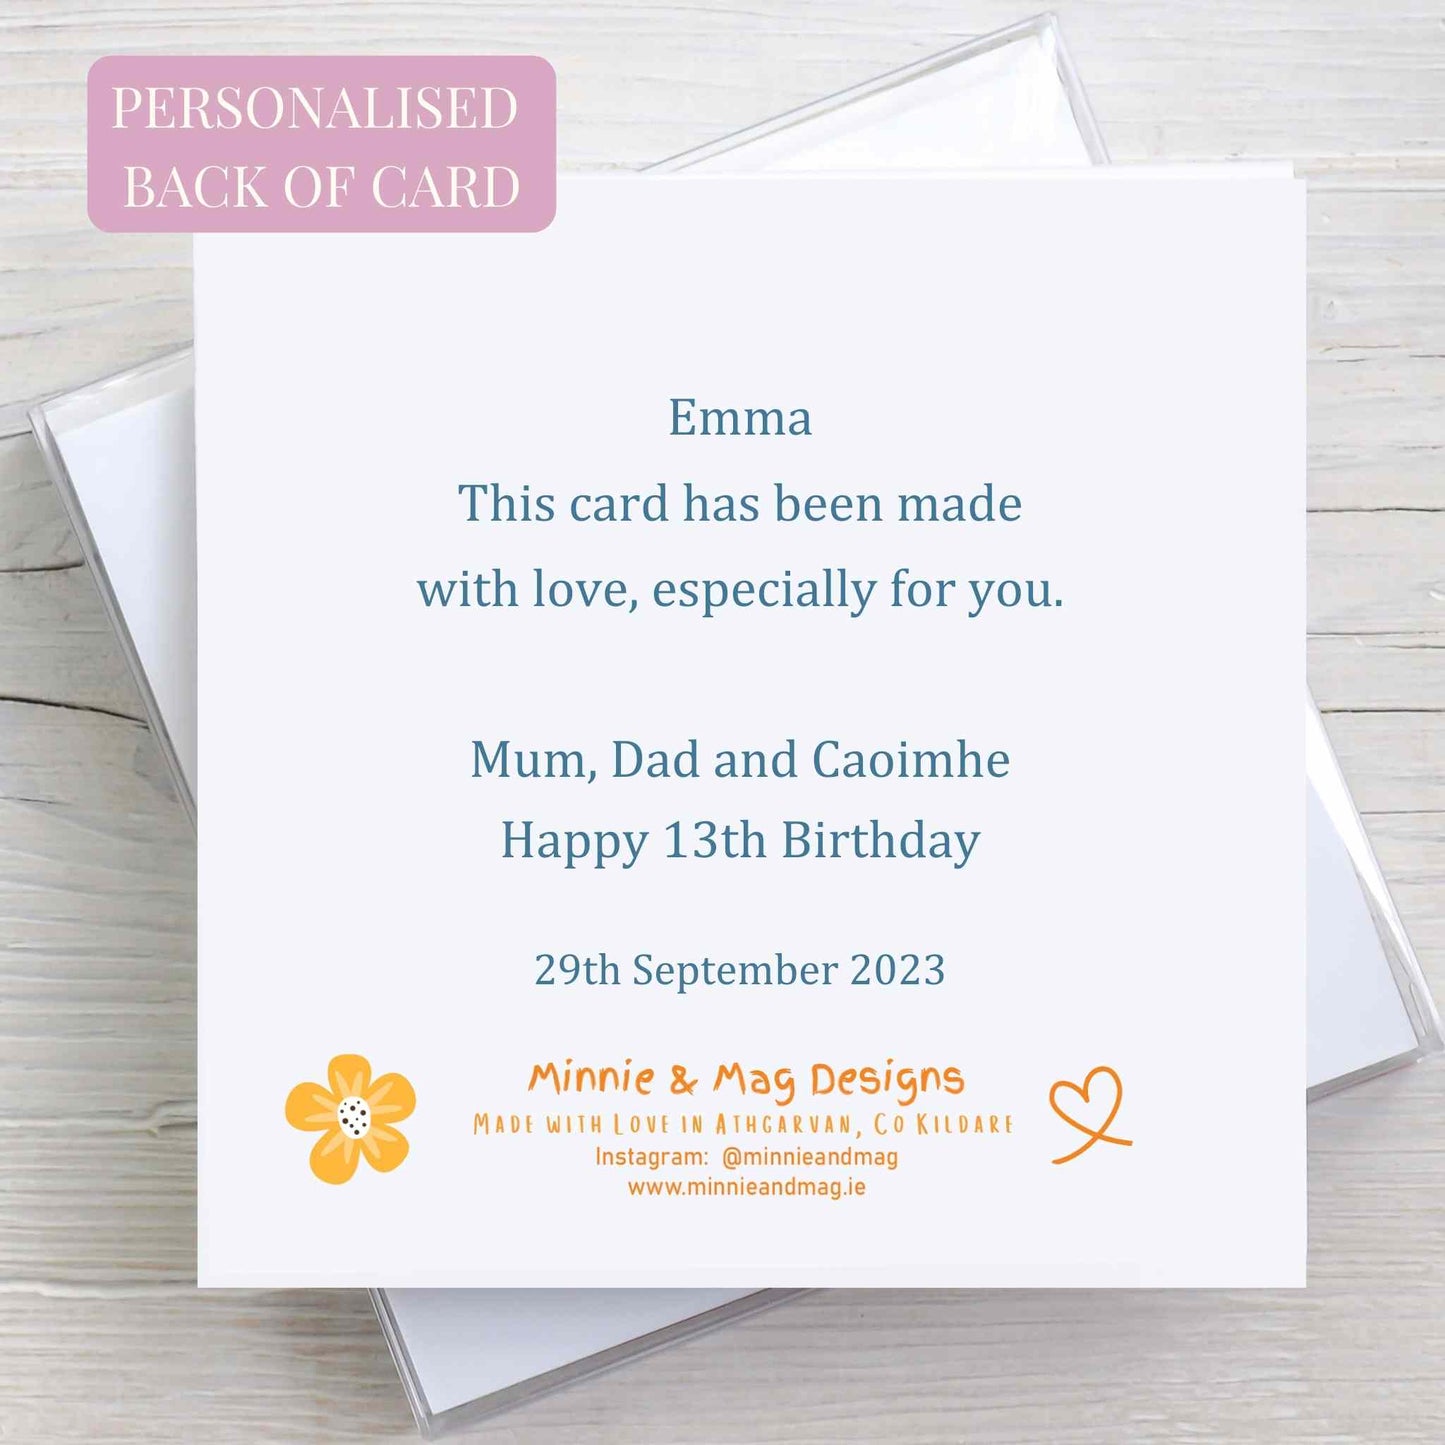 Date of Birth Personalised Birthday Card